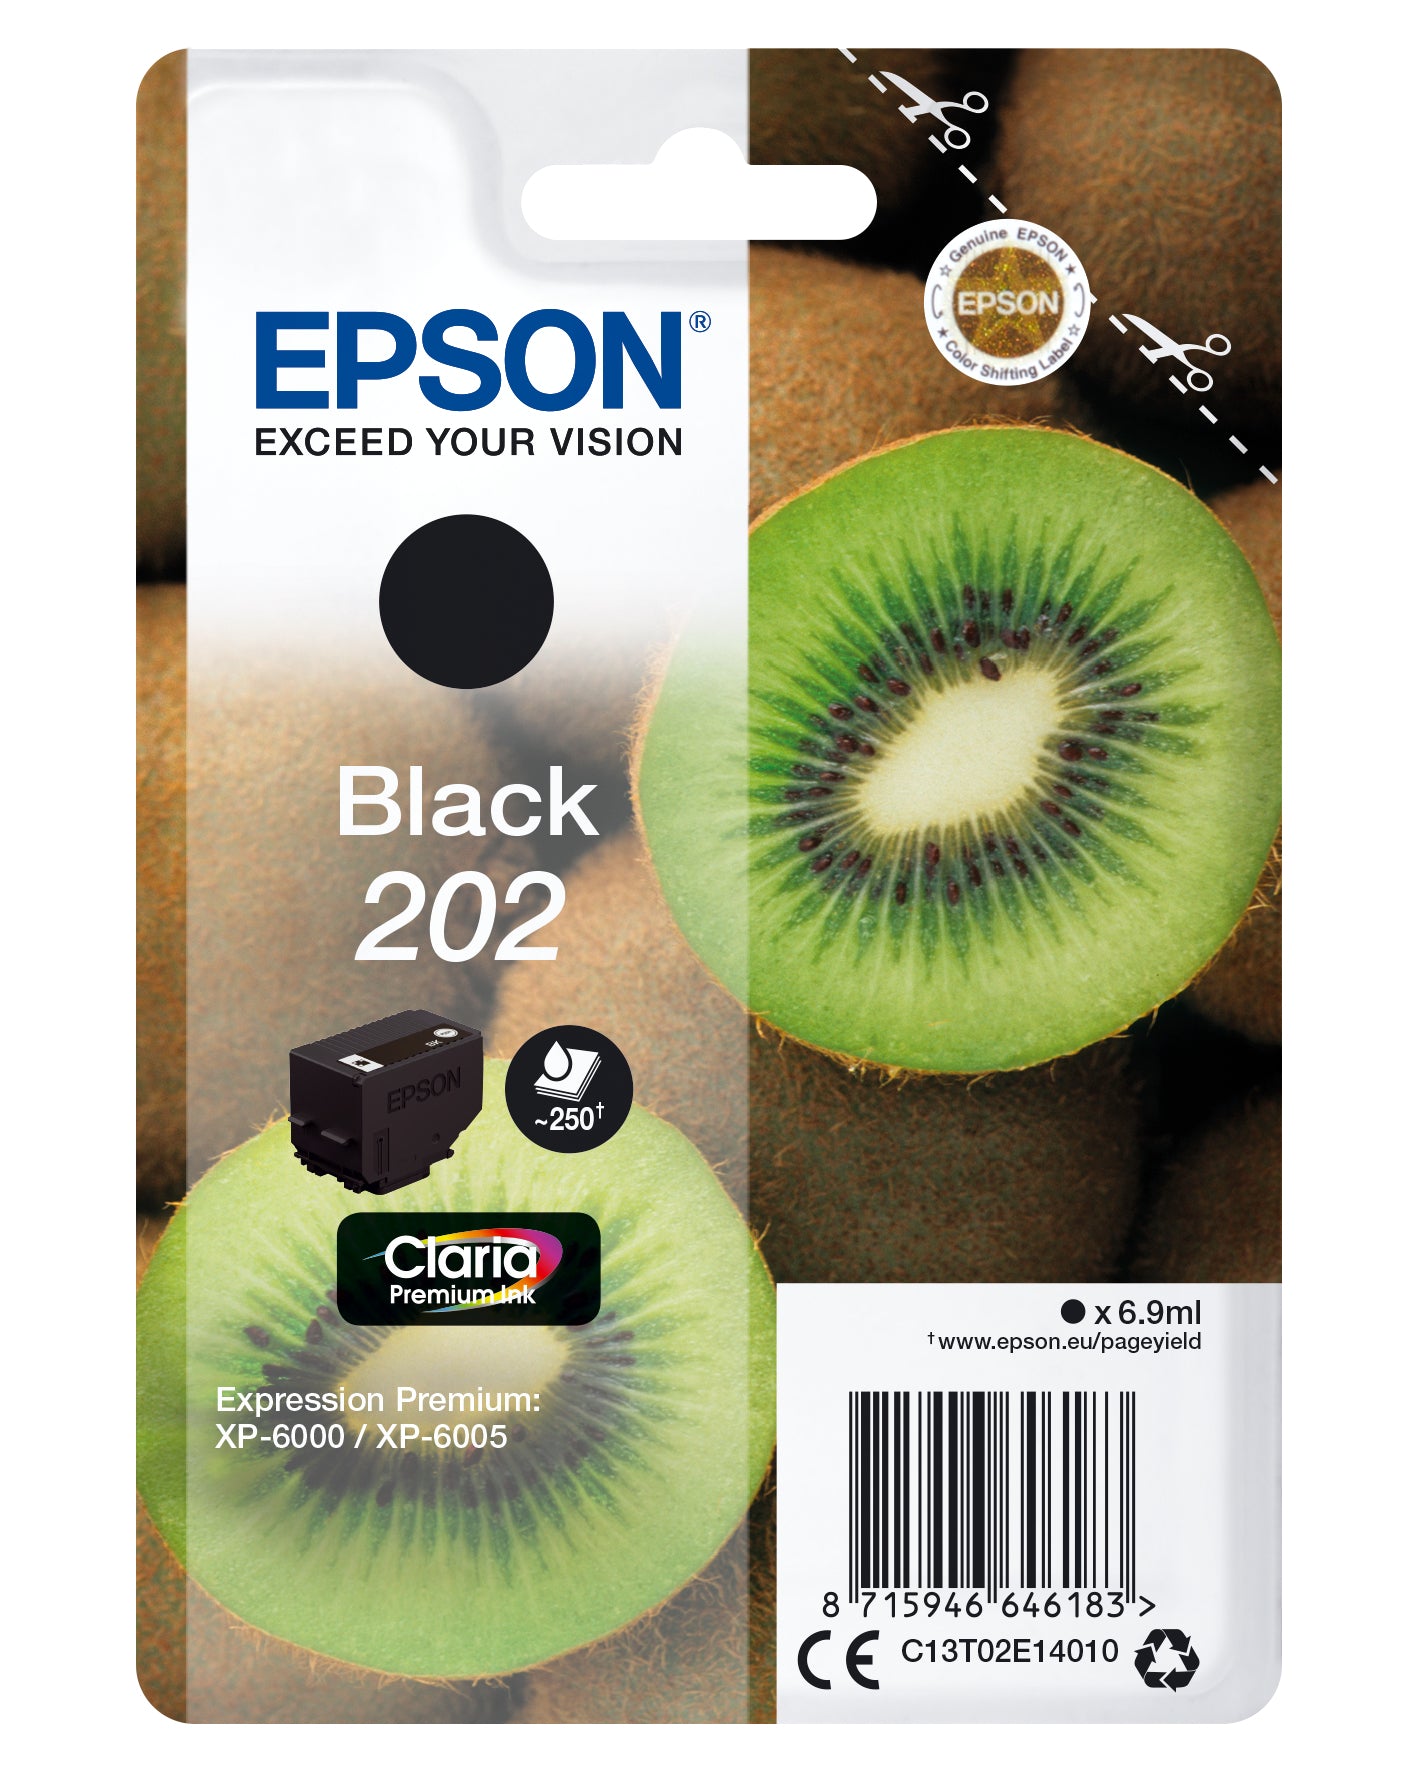 Epson C13T02E14010/202 Ink cartridge black, 250 pages 6.9ml for Epson XP 6000